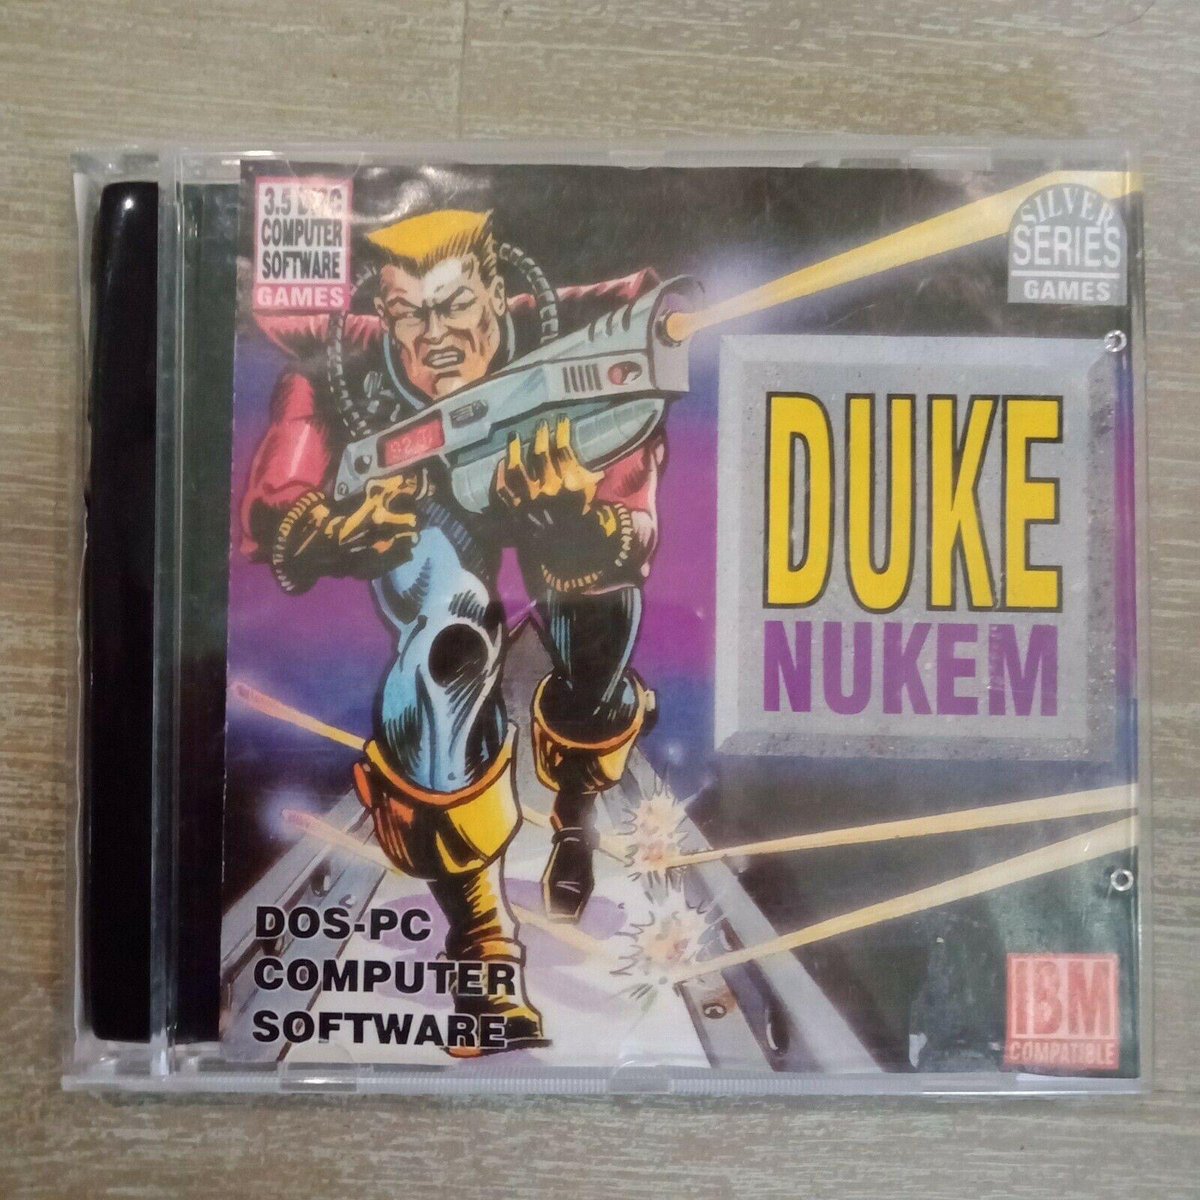 Shareware worked because BBSs, shareware catalogs and stores were allowed to distribute or sell the shareware version of the game. For Apogee in the 90's, that's massive free UA (user acquisition)! Here's a shareware disc for Duke Nukem that was made & sold in Australia. BTW, we…